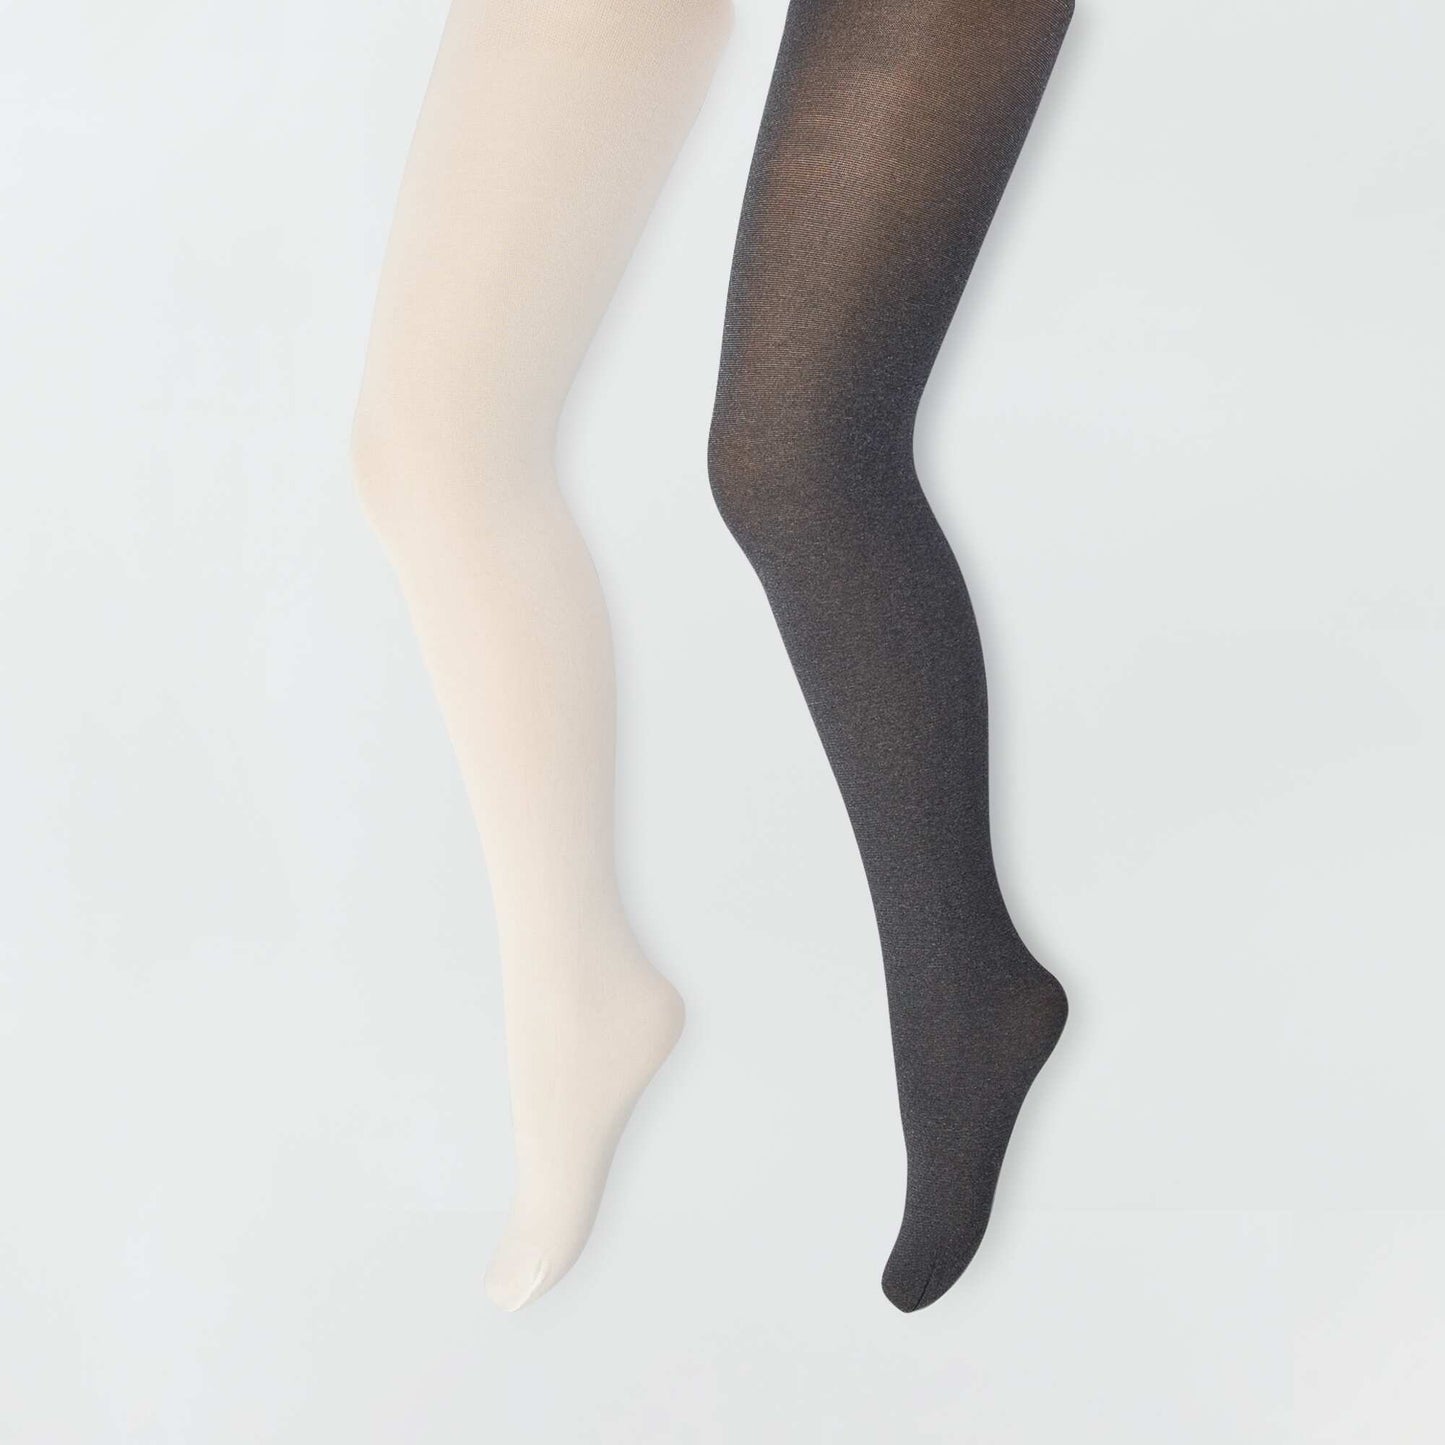 Pack of 2 pairs of tights GREY